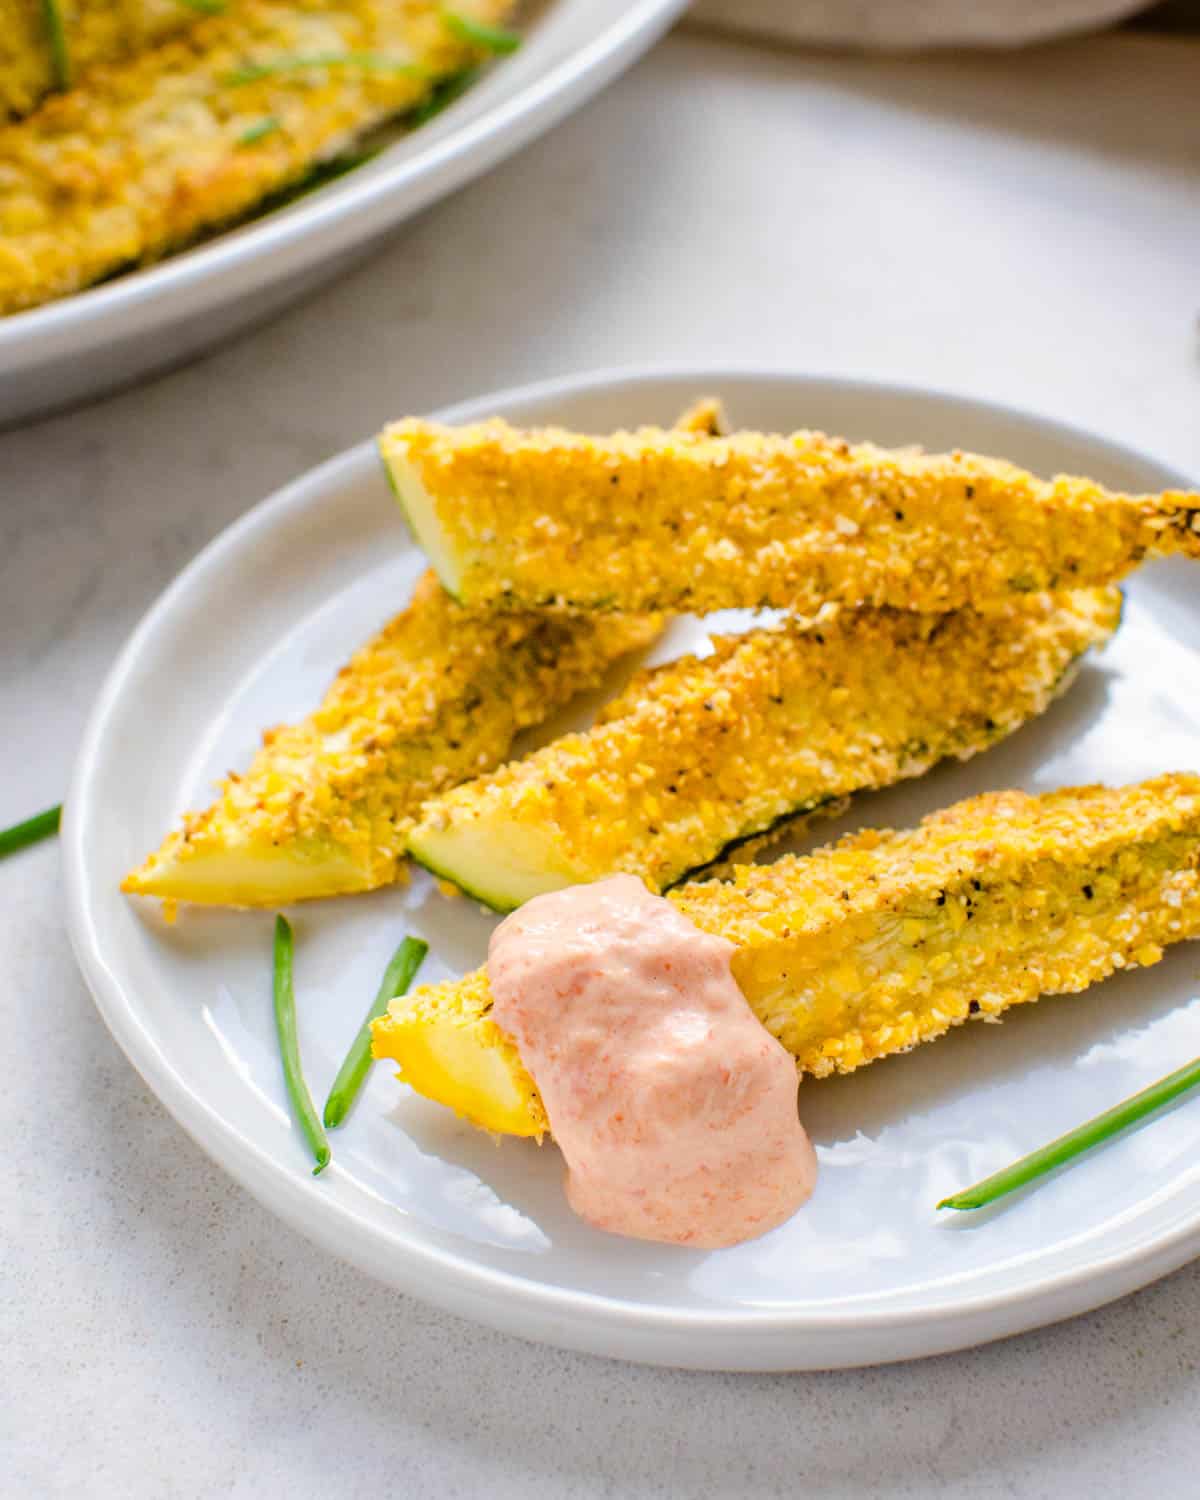 A plate of zucchini fries with aioli.